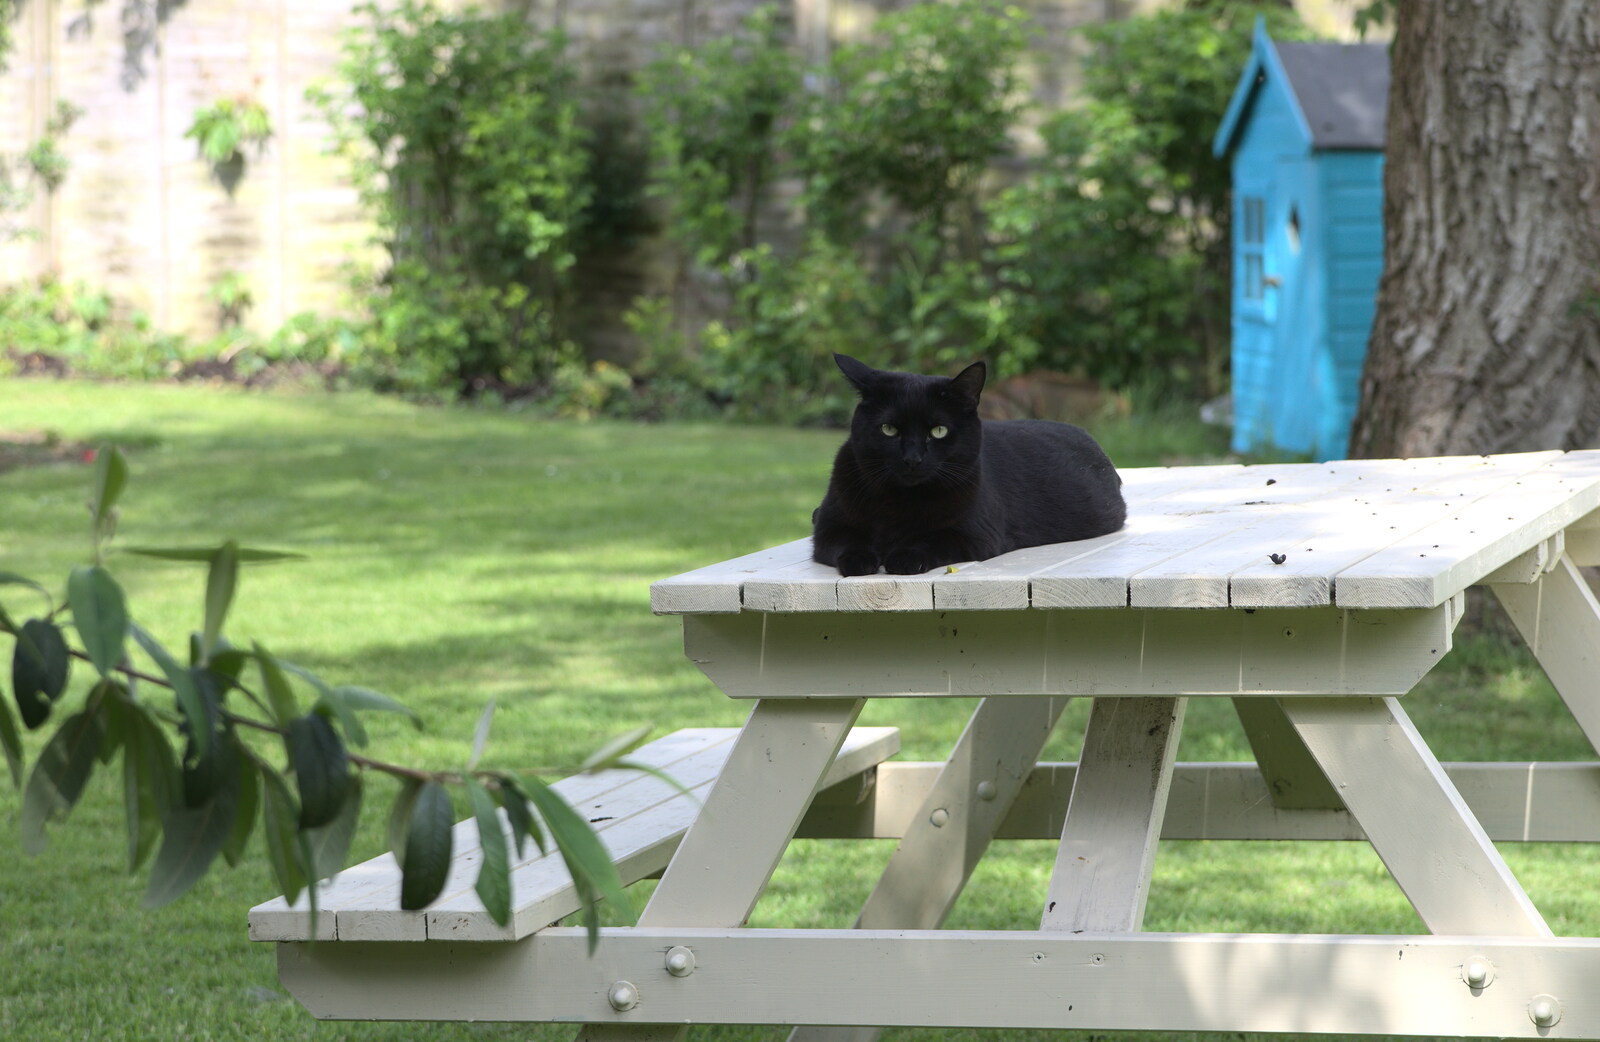 Millie the Mooch sits on a bench from A "Not a Birthday Party" Barbeque, Brome, Suffolk - 25th May 2014